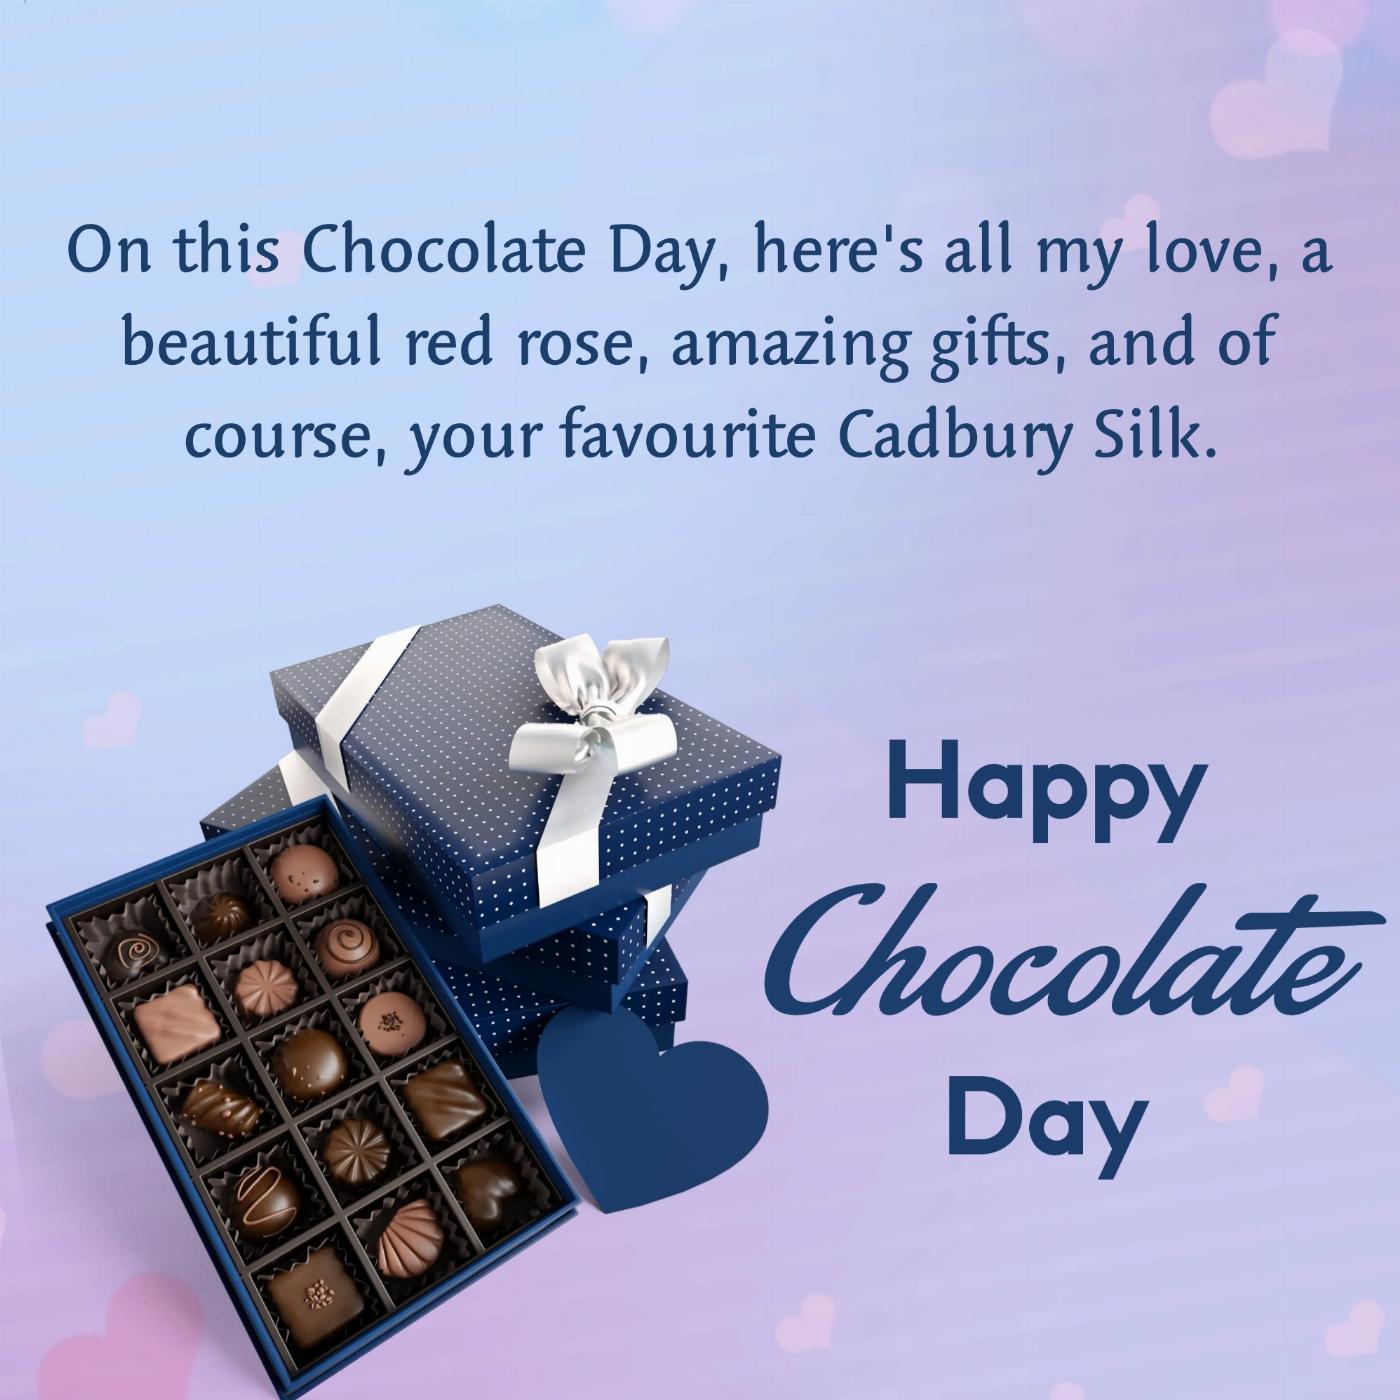 On this Chocolate Day here's all my love